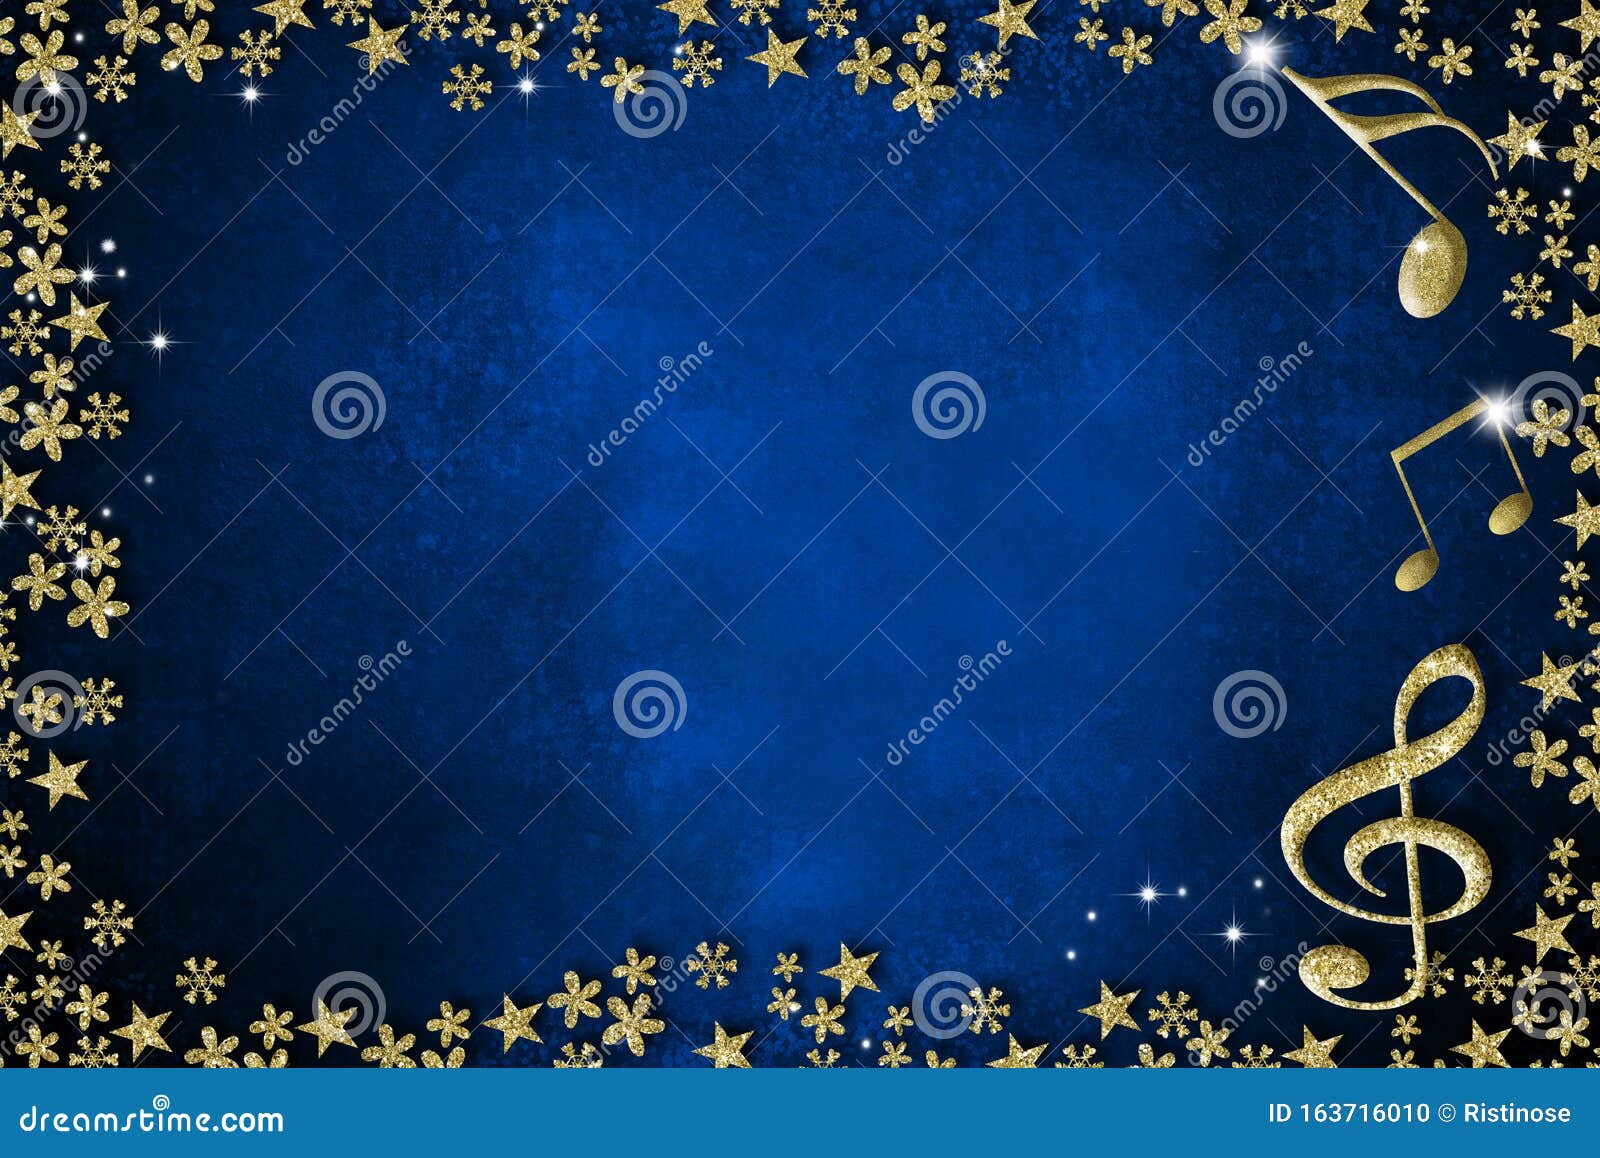 christmas musical card background invites